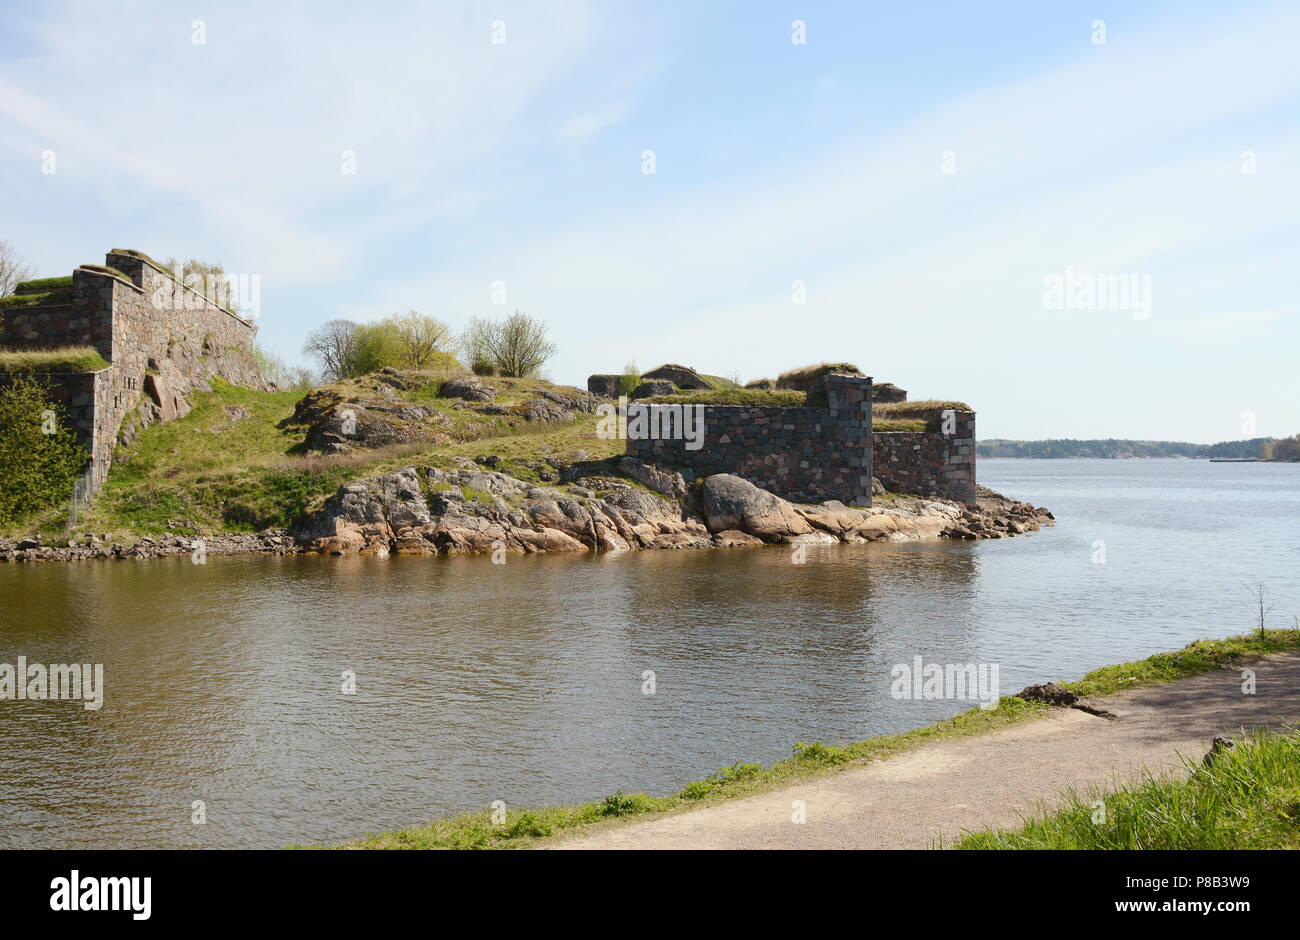 Thick defensive stone walls on the fortress island of Suomenlinna, Finland Stock Photo